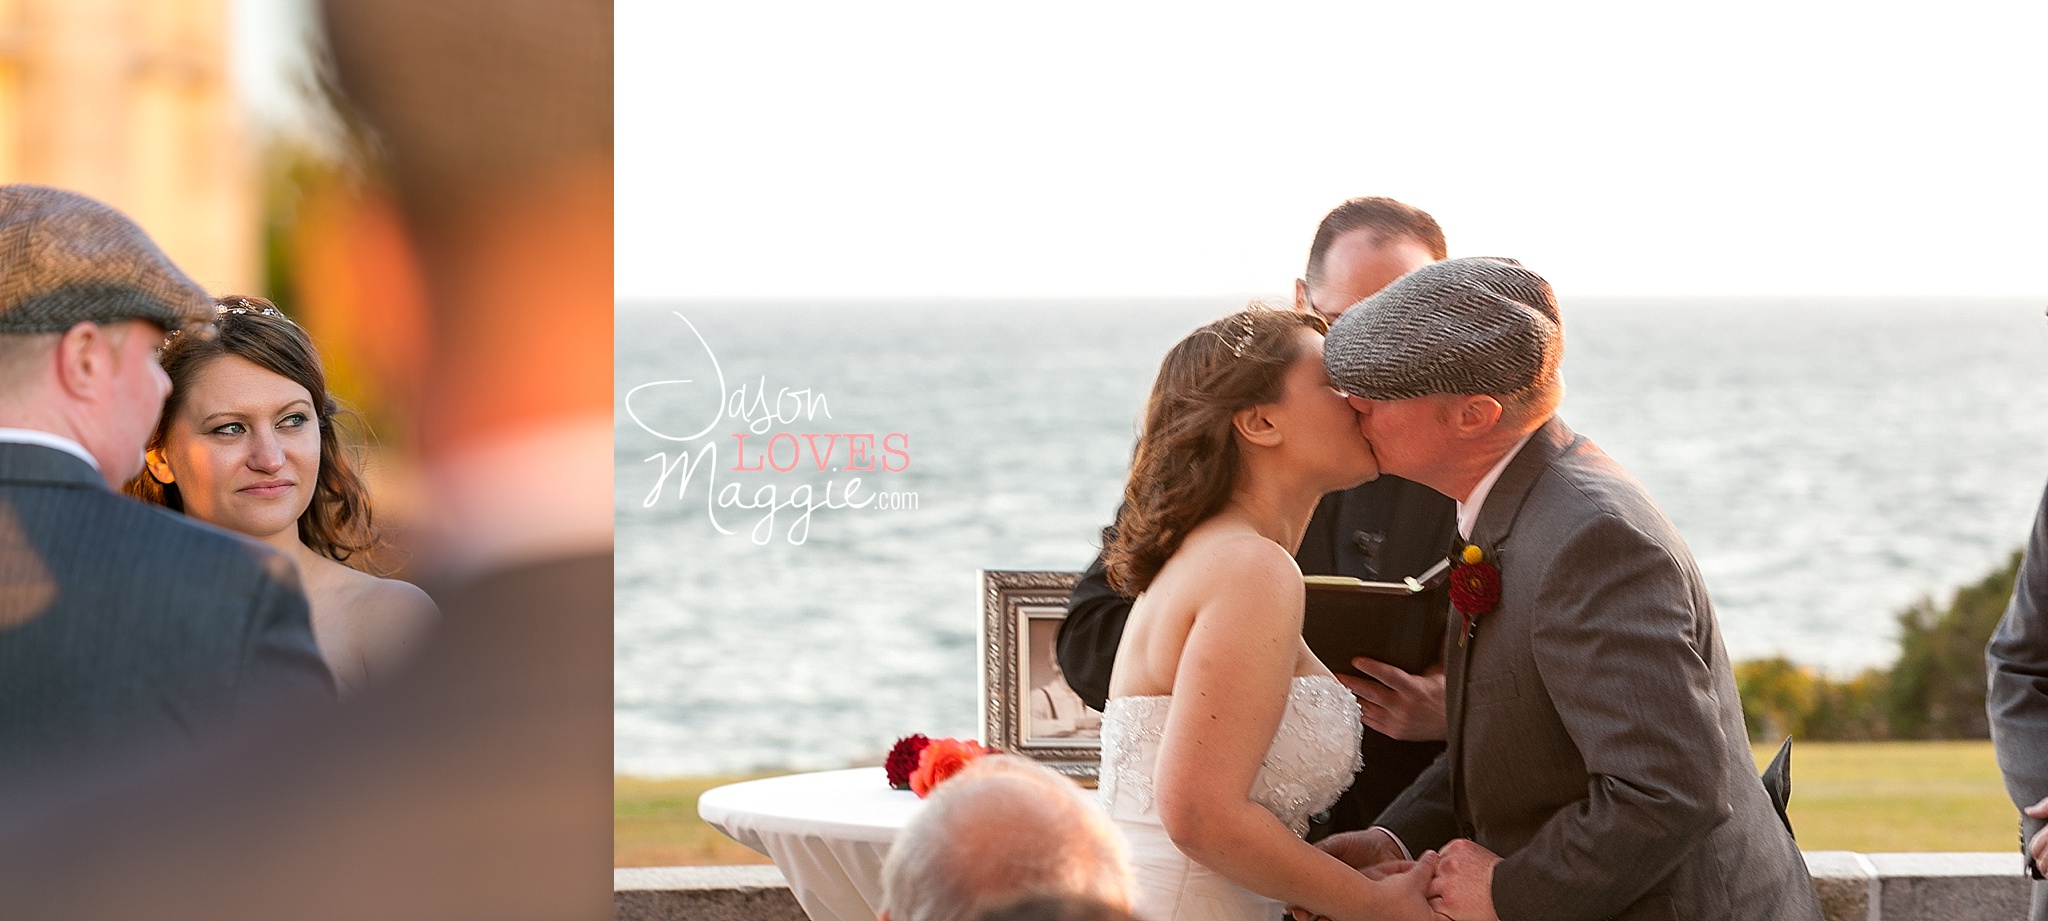 Intimate Wedding, Branford house. Jason & Maggie, Jason Loves Maggie. Connecticut Outdoor Wedding Photographers for playful couples that celebrate intimacy, and live spontaneously.